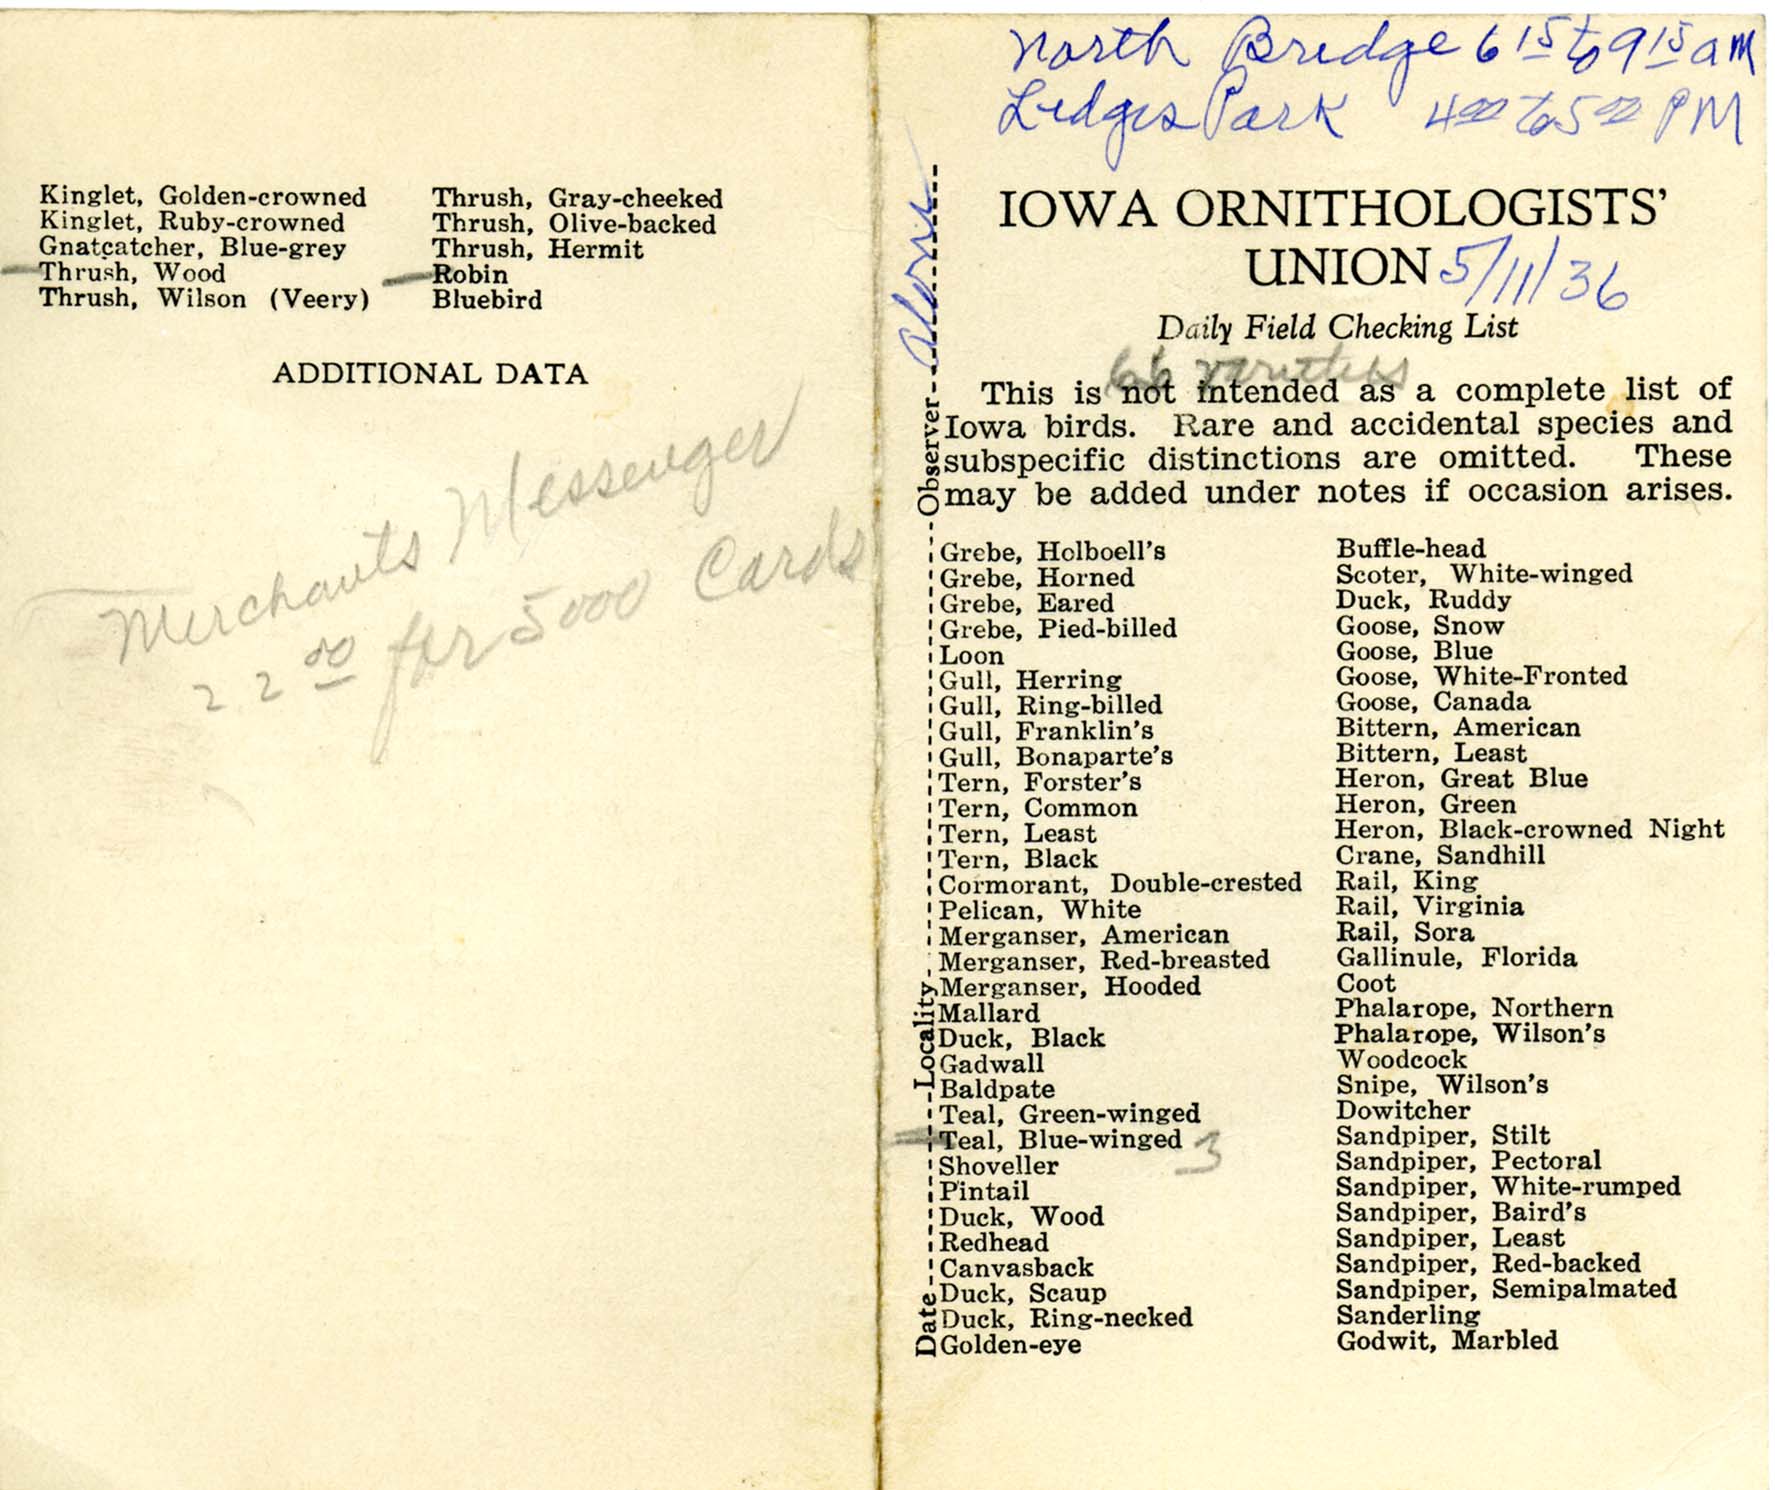 Daily field checking list by Walter Rosene, May 11, 1936